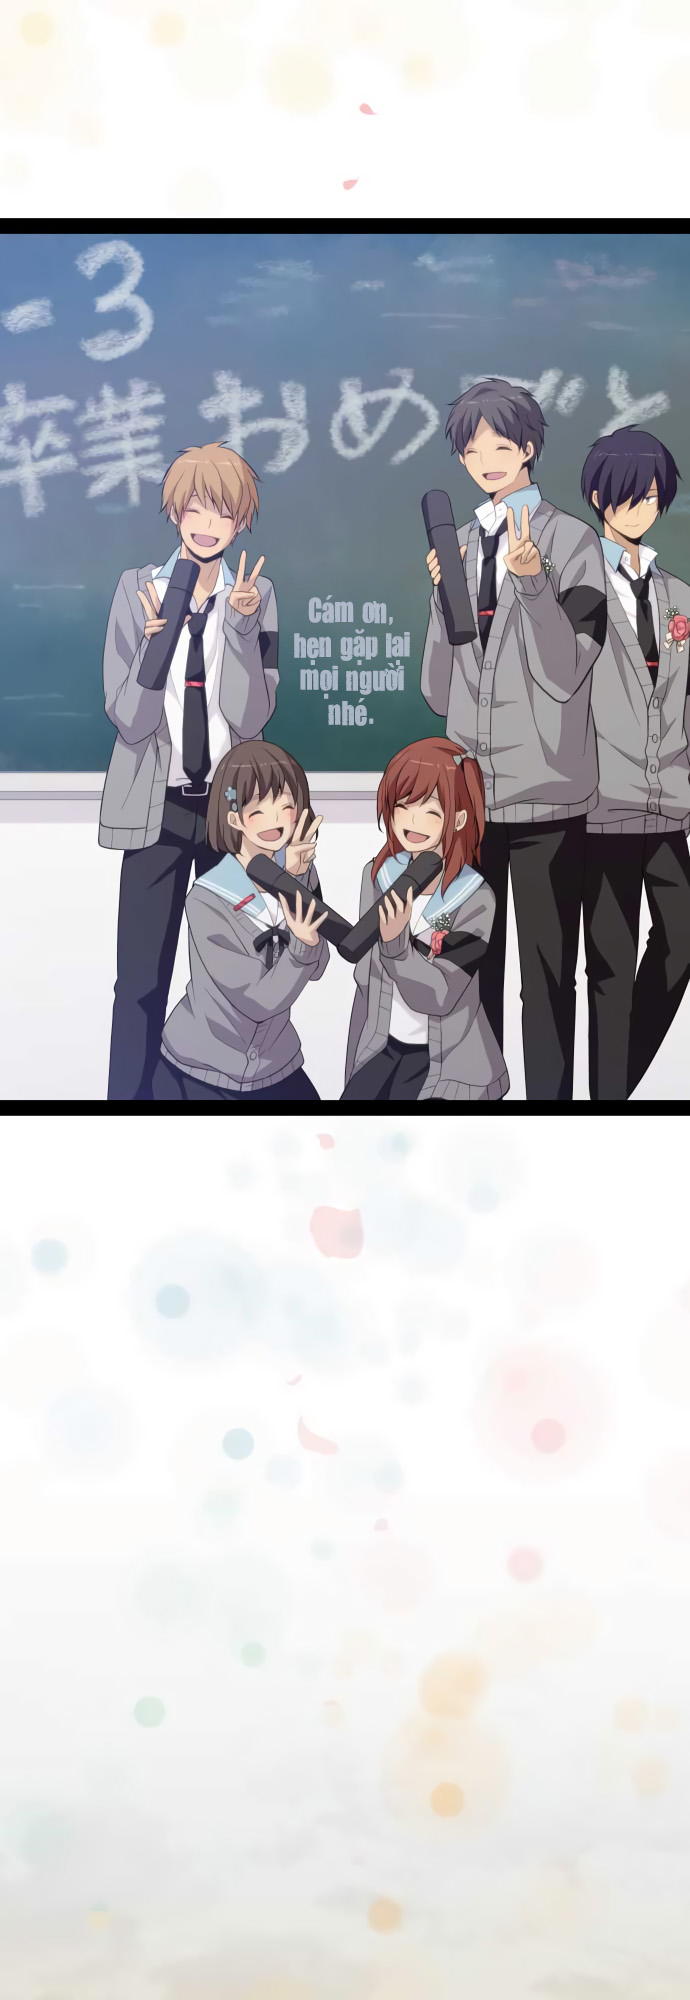 ReLife Chapter 212 - DocTruyen.Co